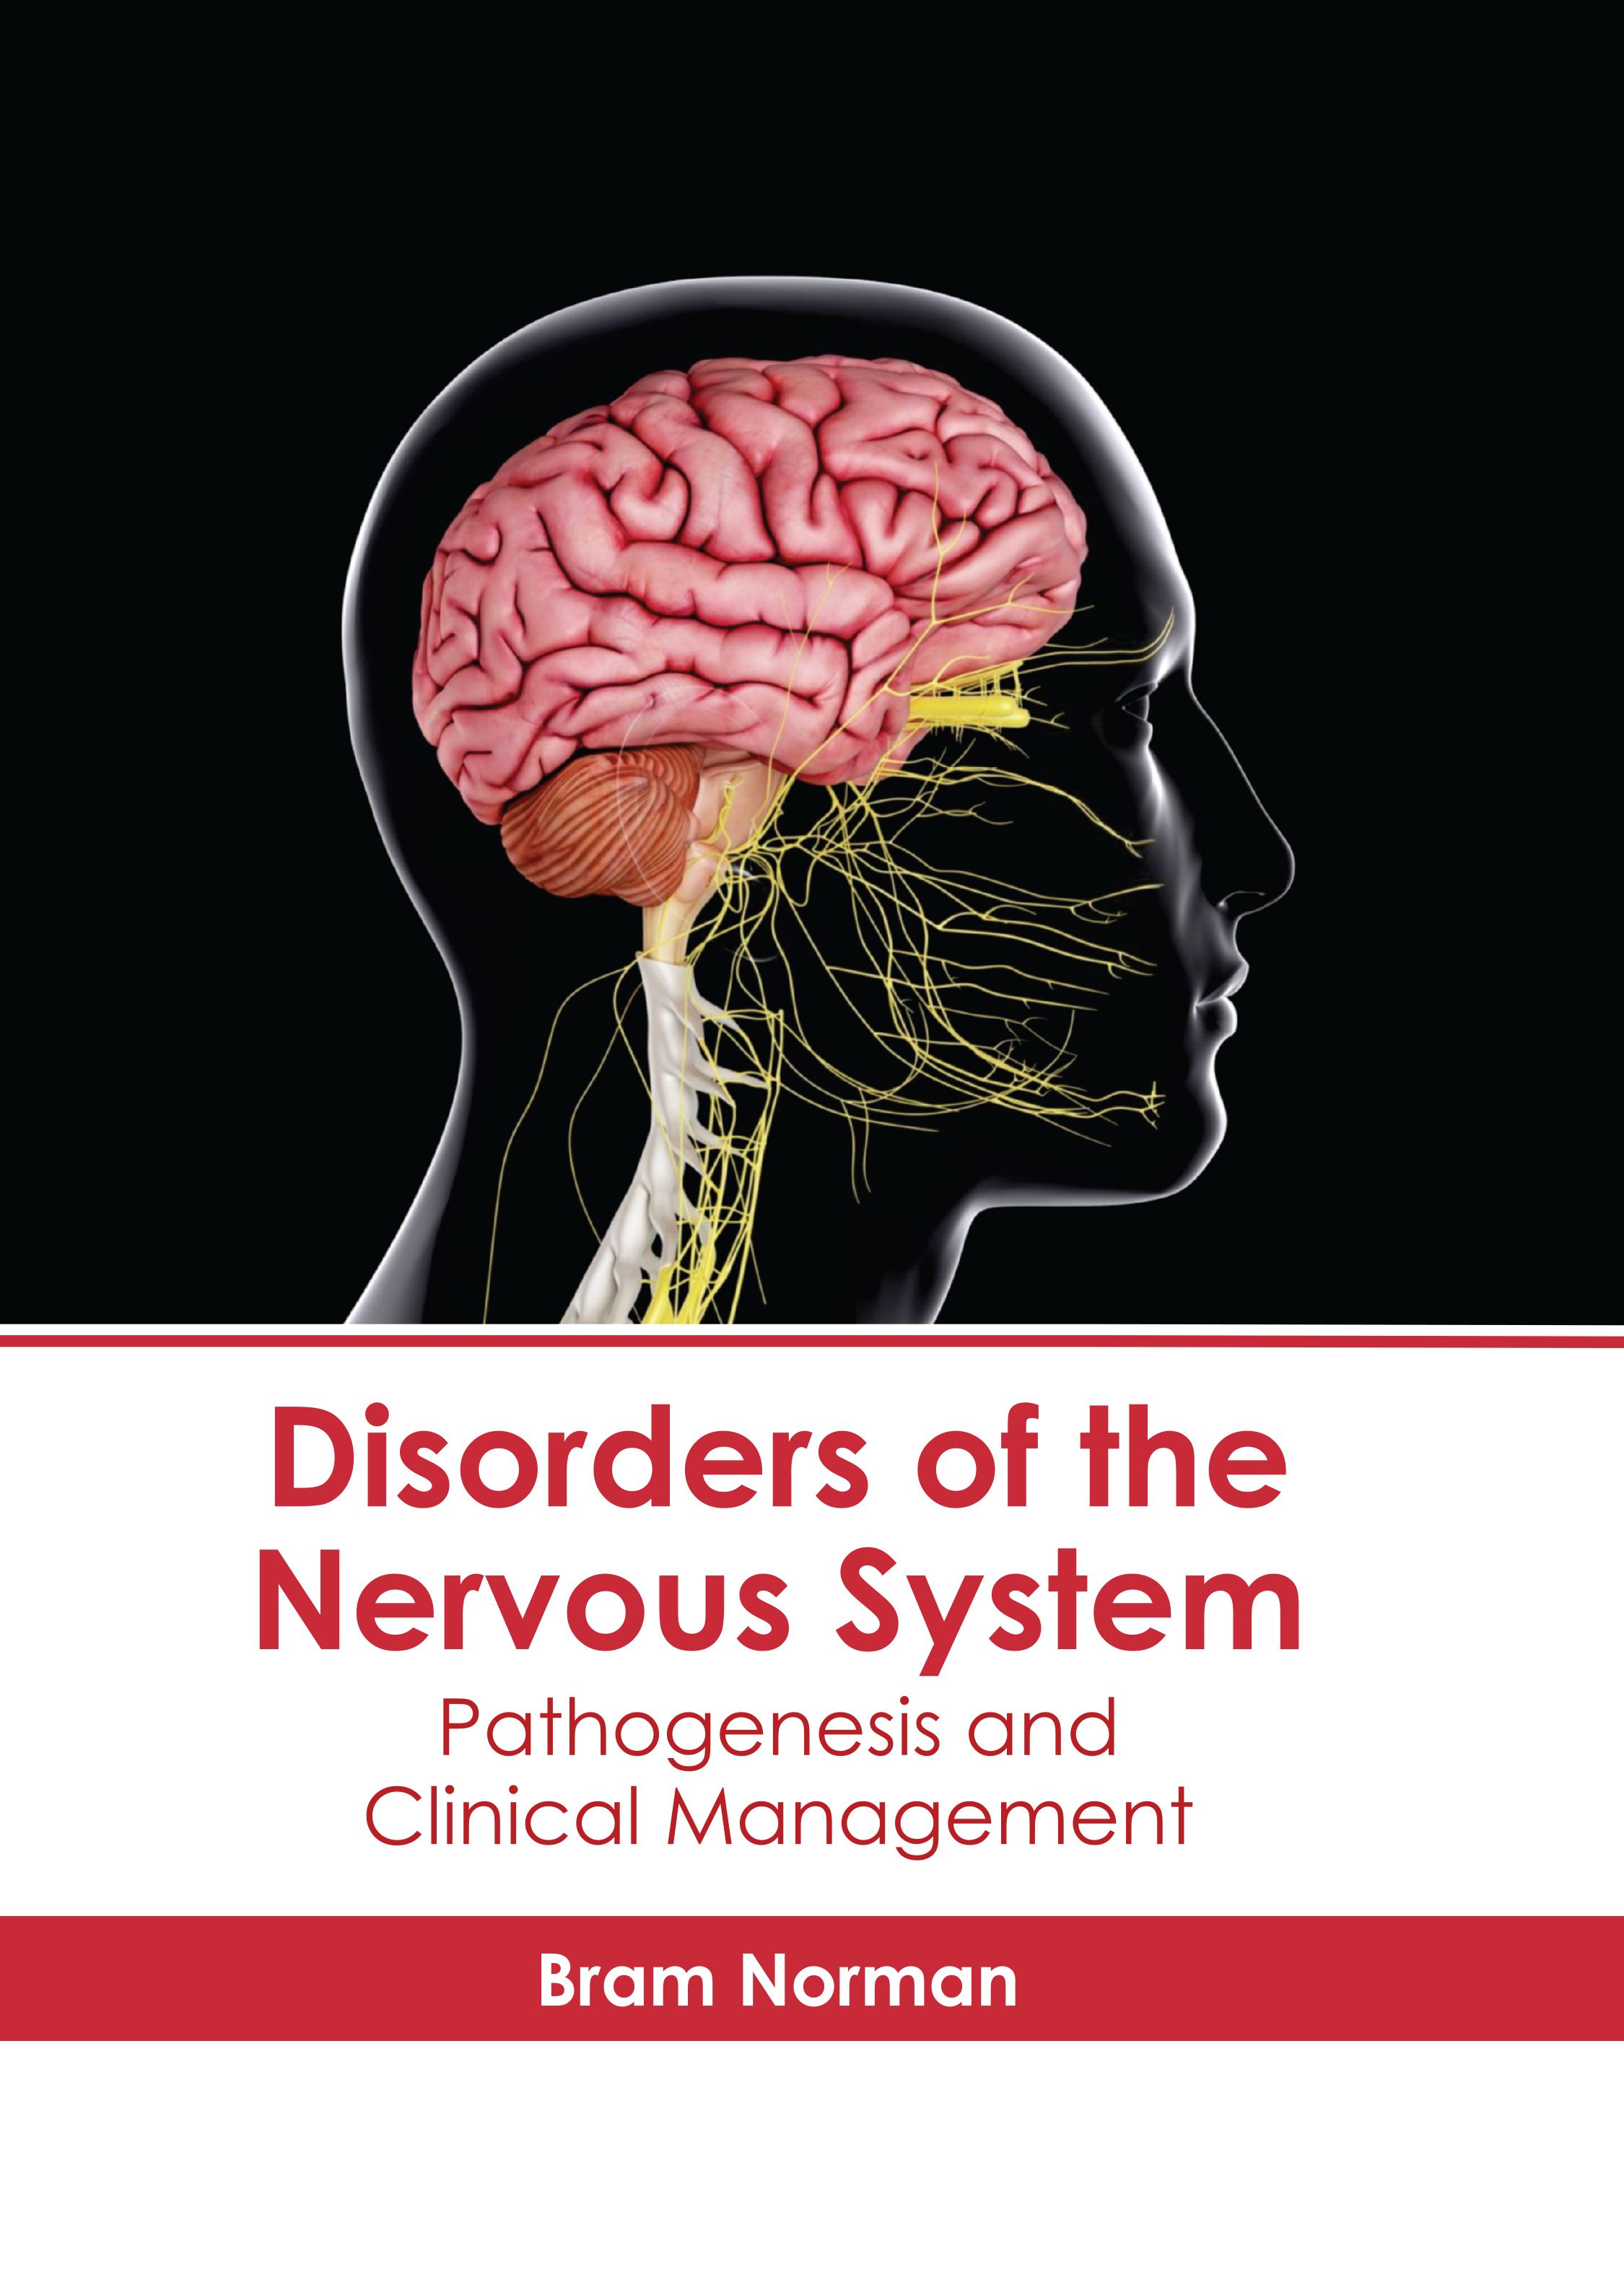 

exclusive-publishers/american-medical-publishers/disorders-of-the-nervous-system-pathogenesis-and-clinical-management-9798887400679